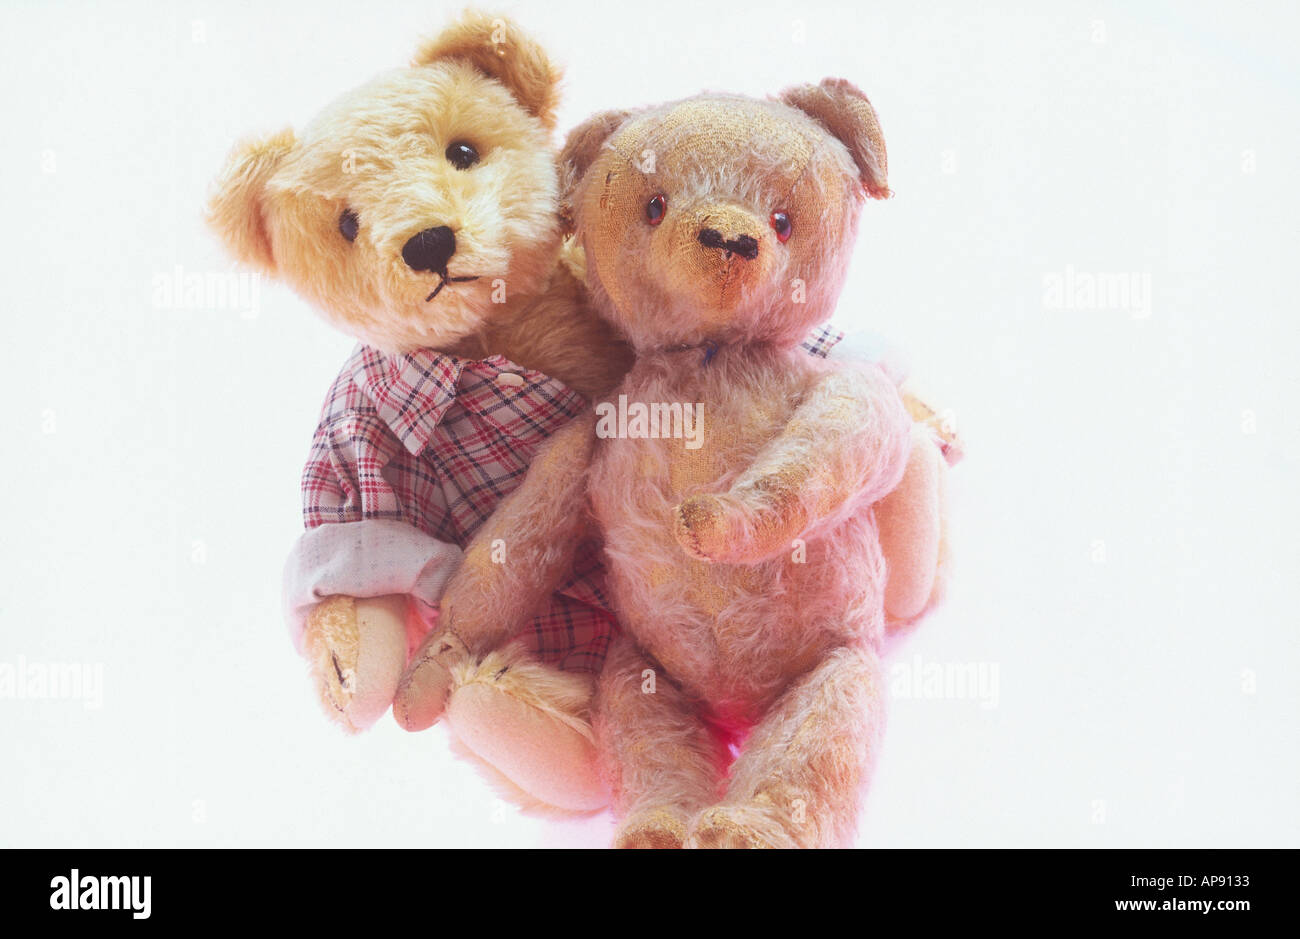 Close-up of two teddy bears Stock Photo